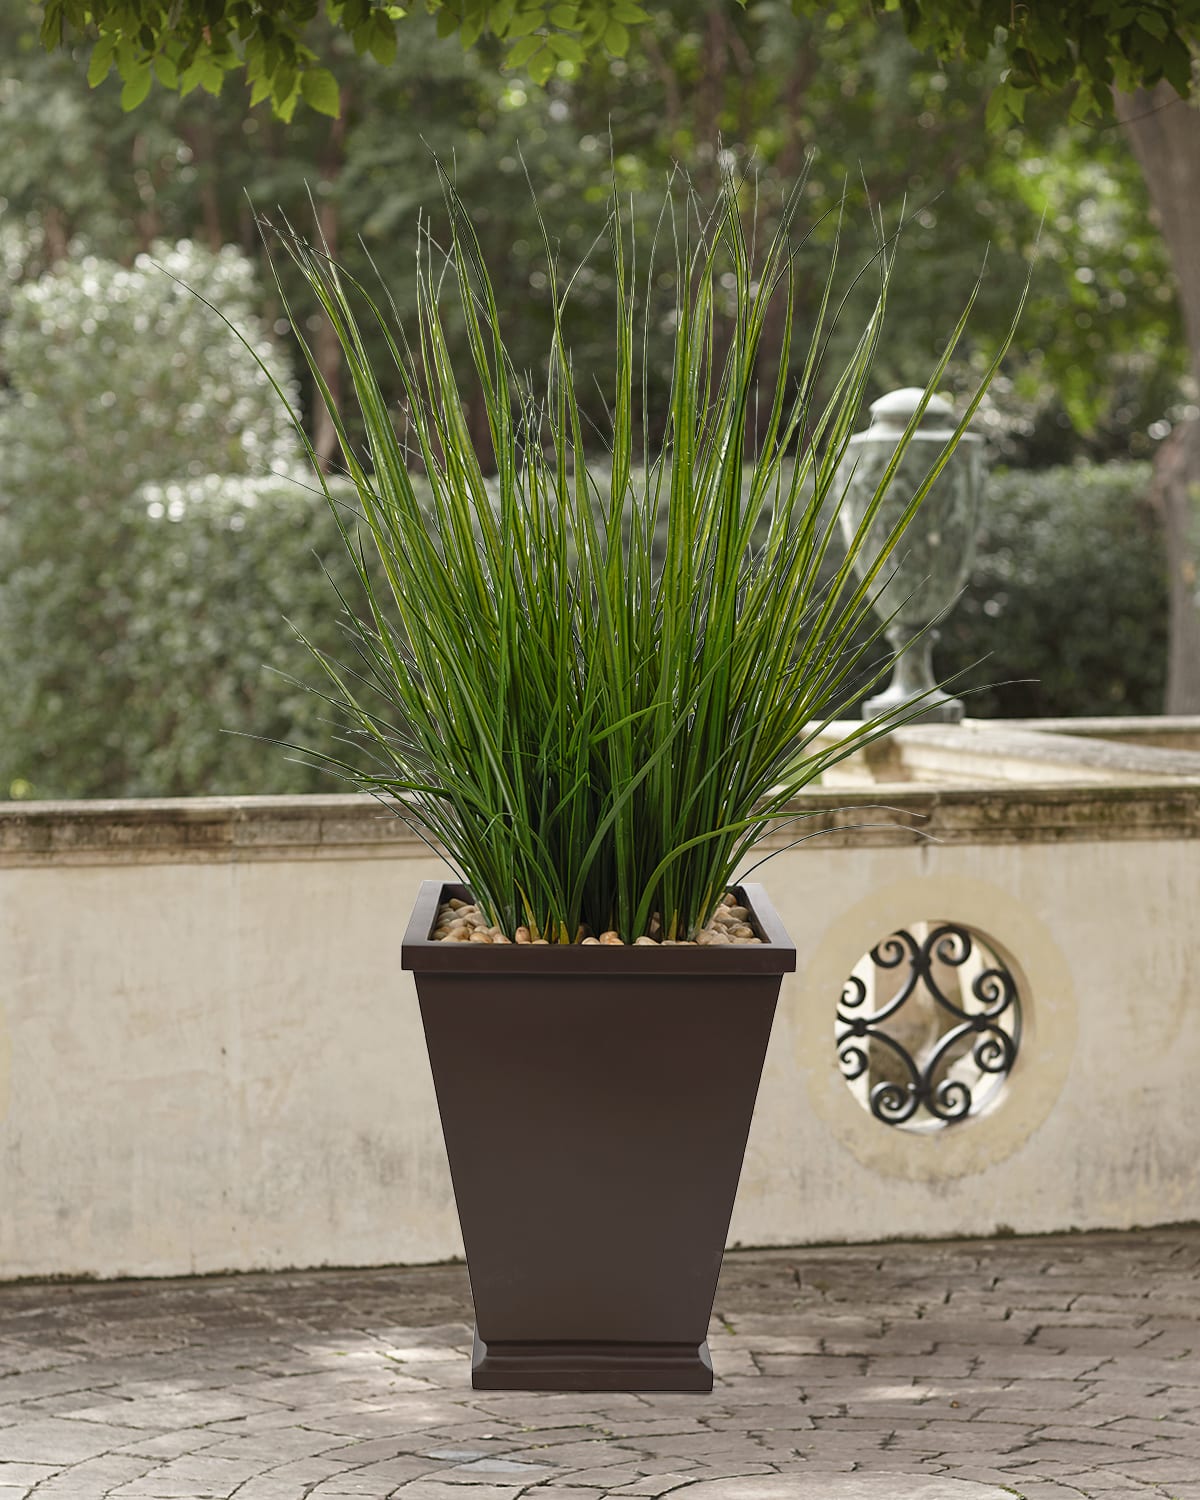 Faux Grass In Tapered Square Pot, 65"T